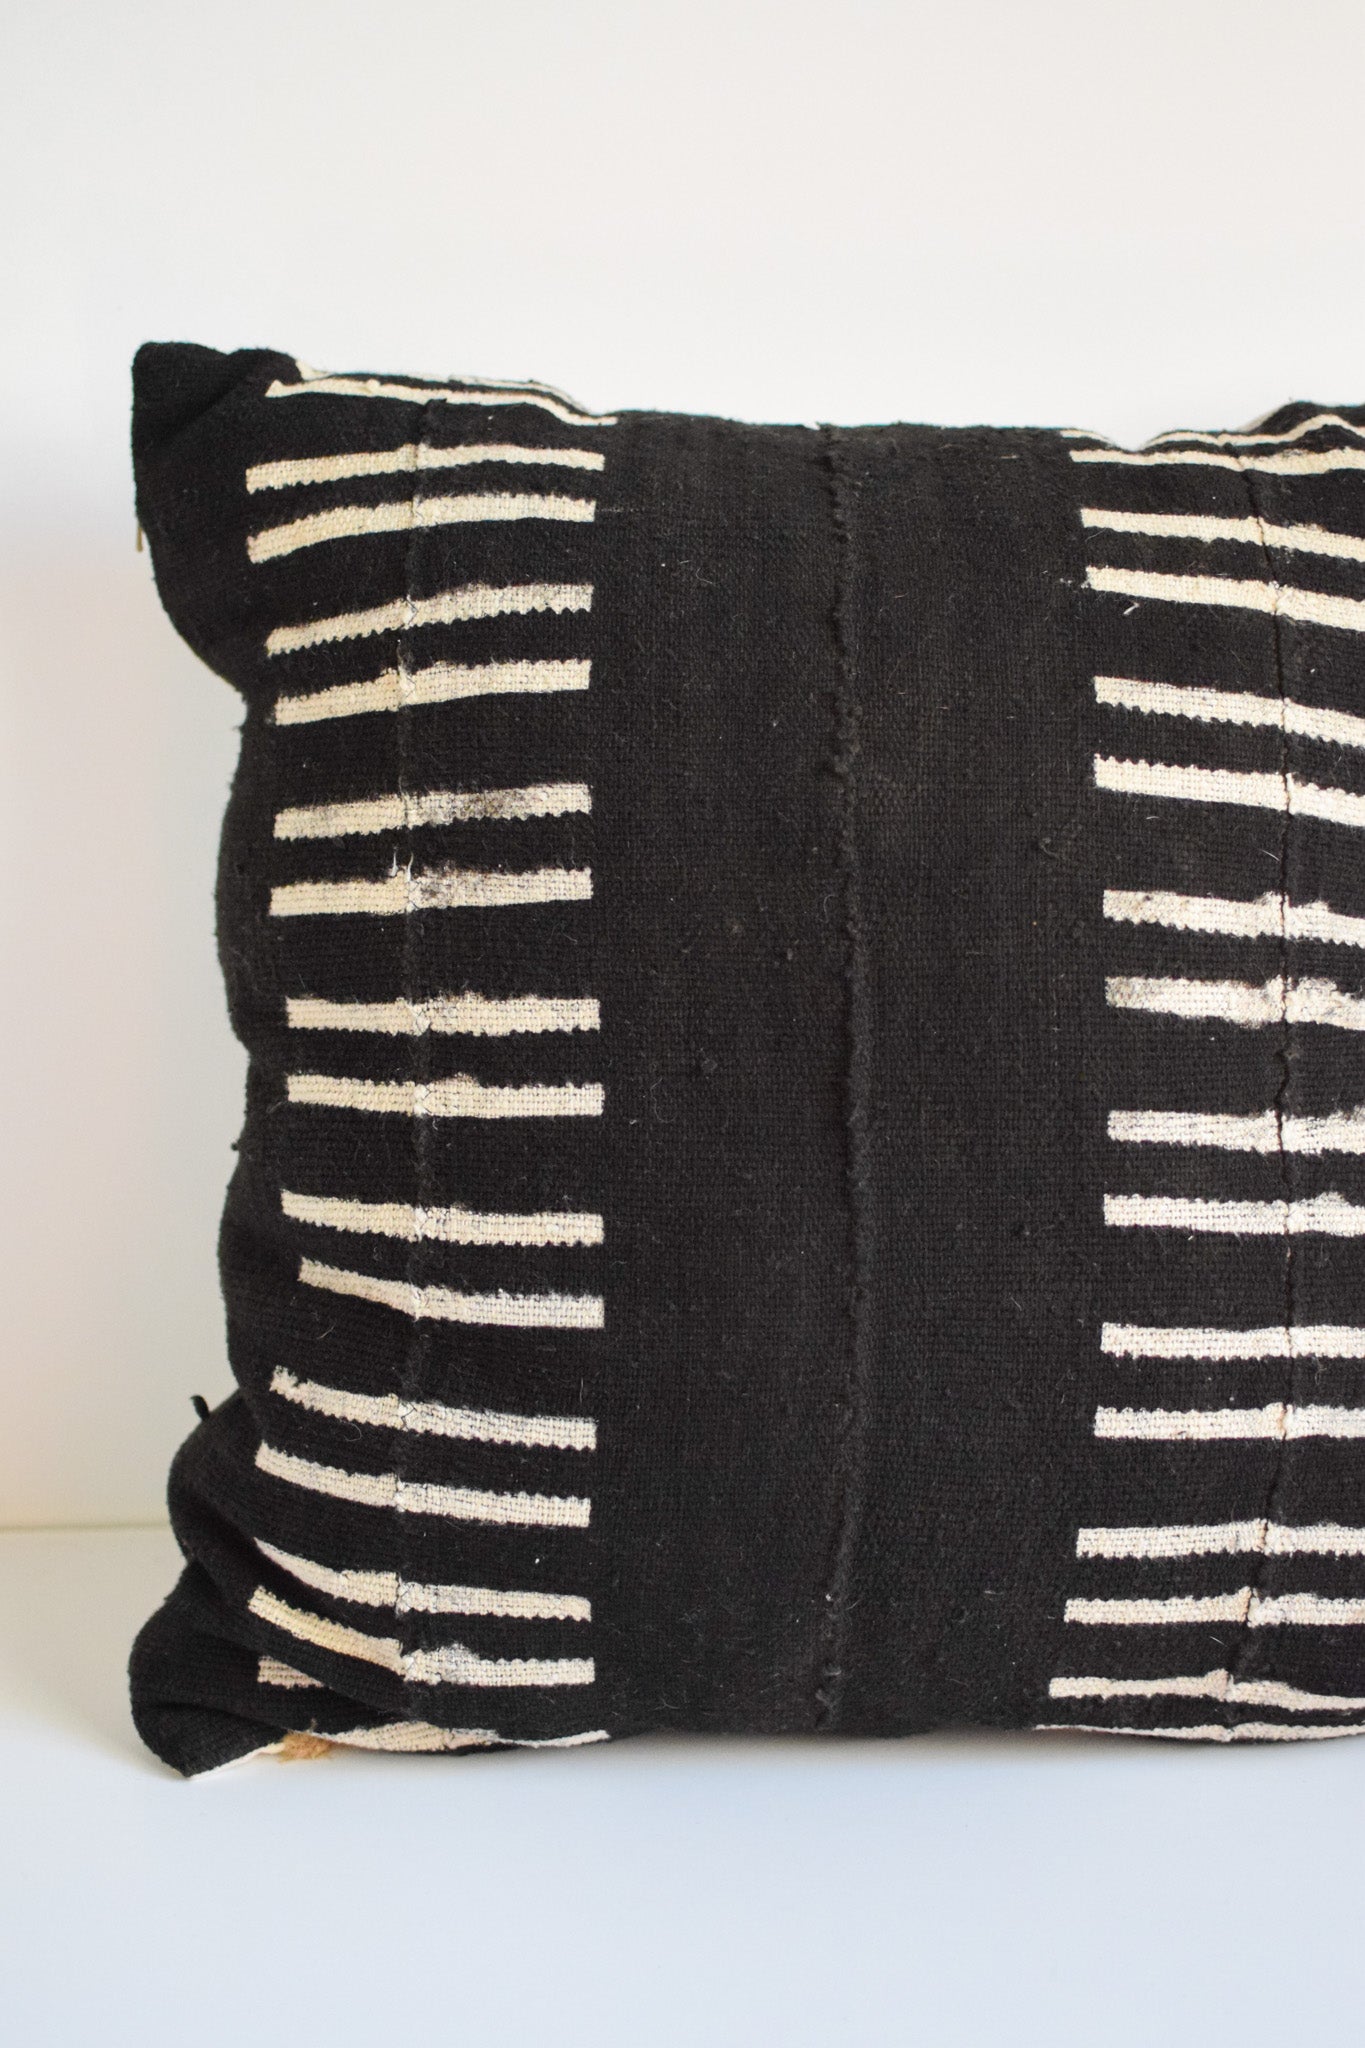 Hightower Mudcloth Pillow Cover